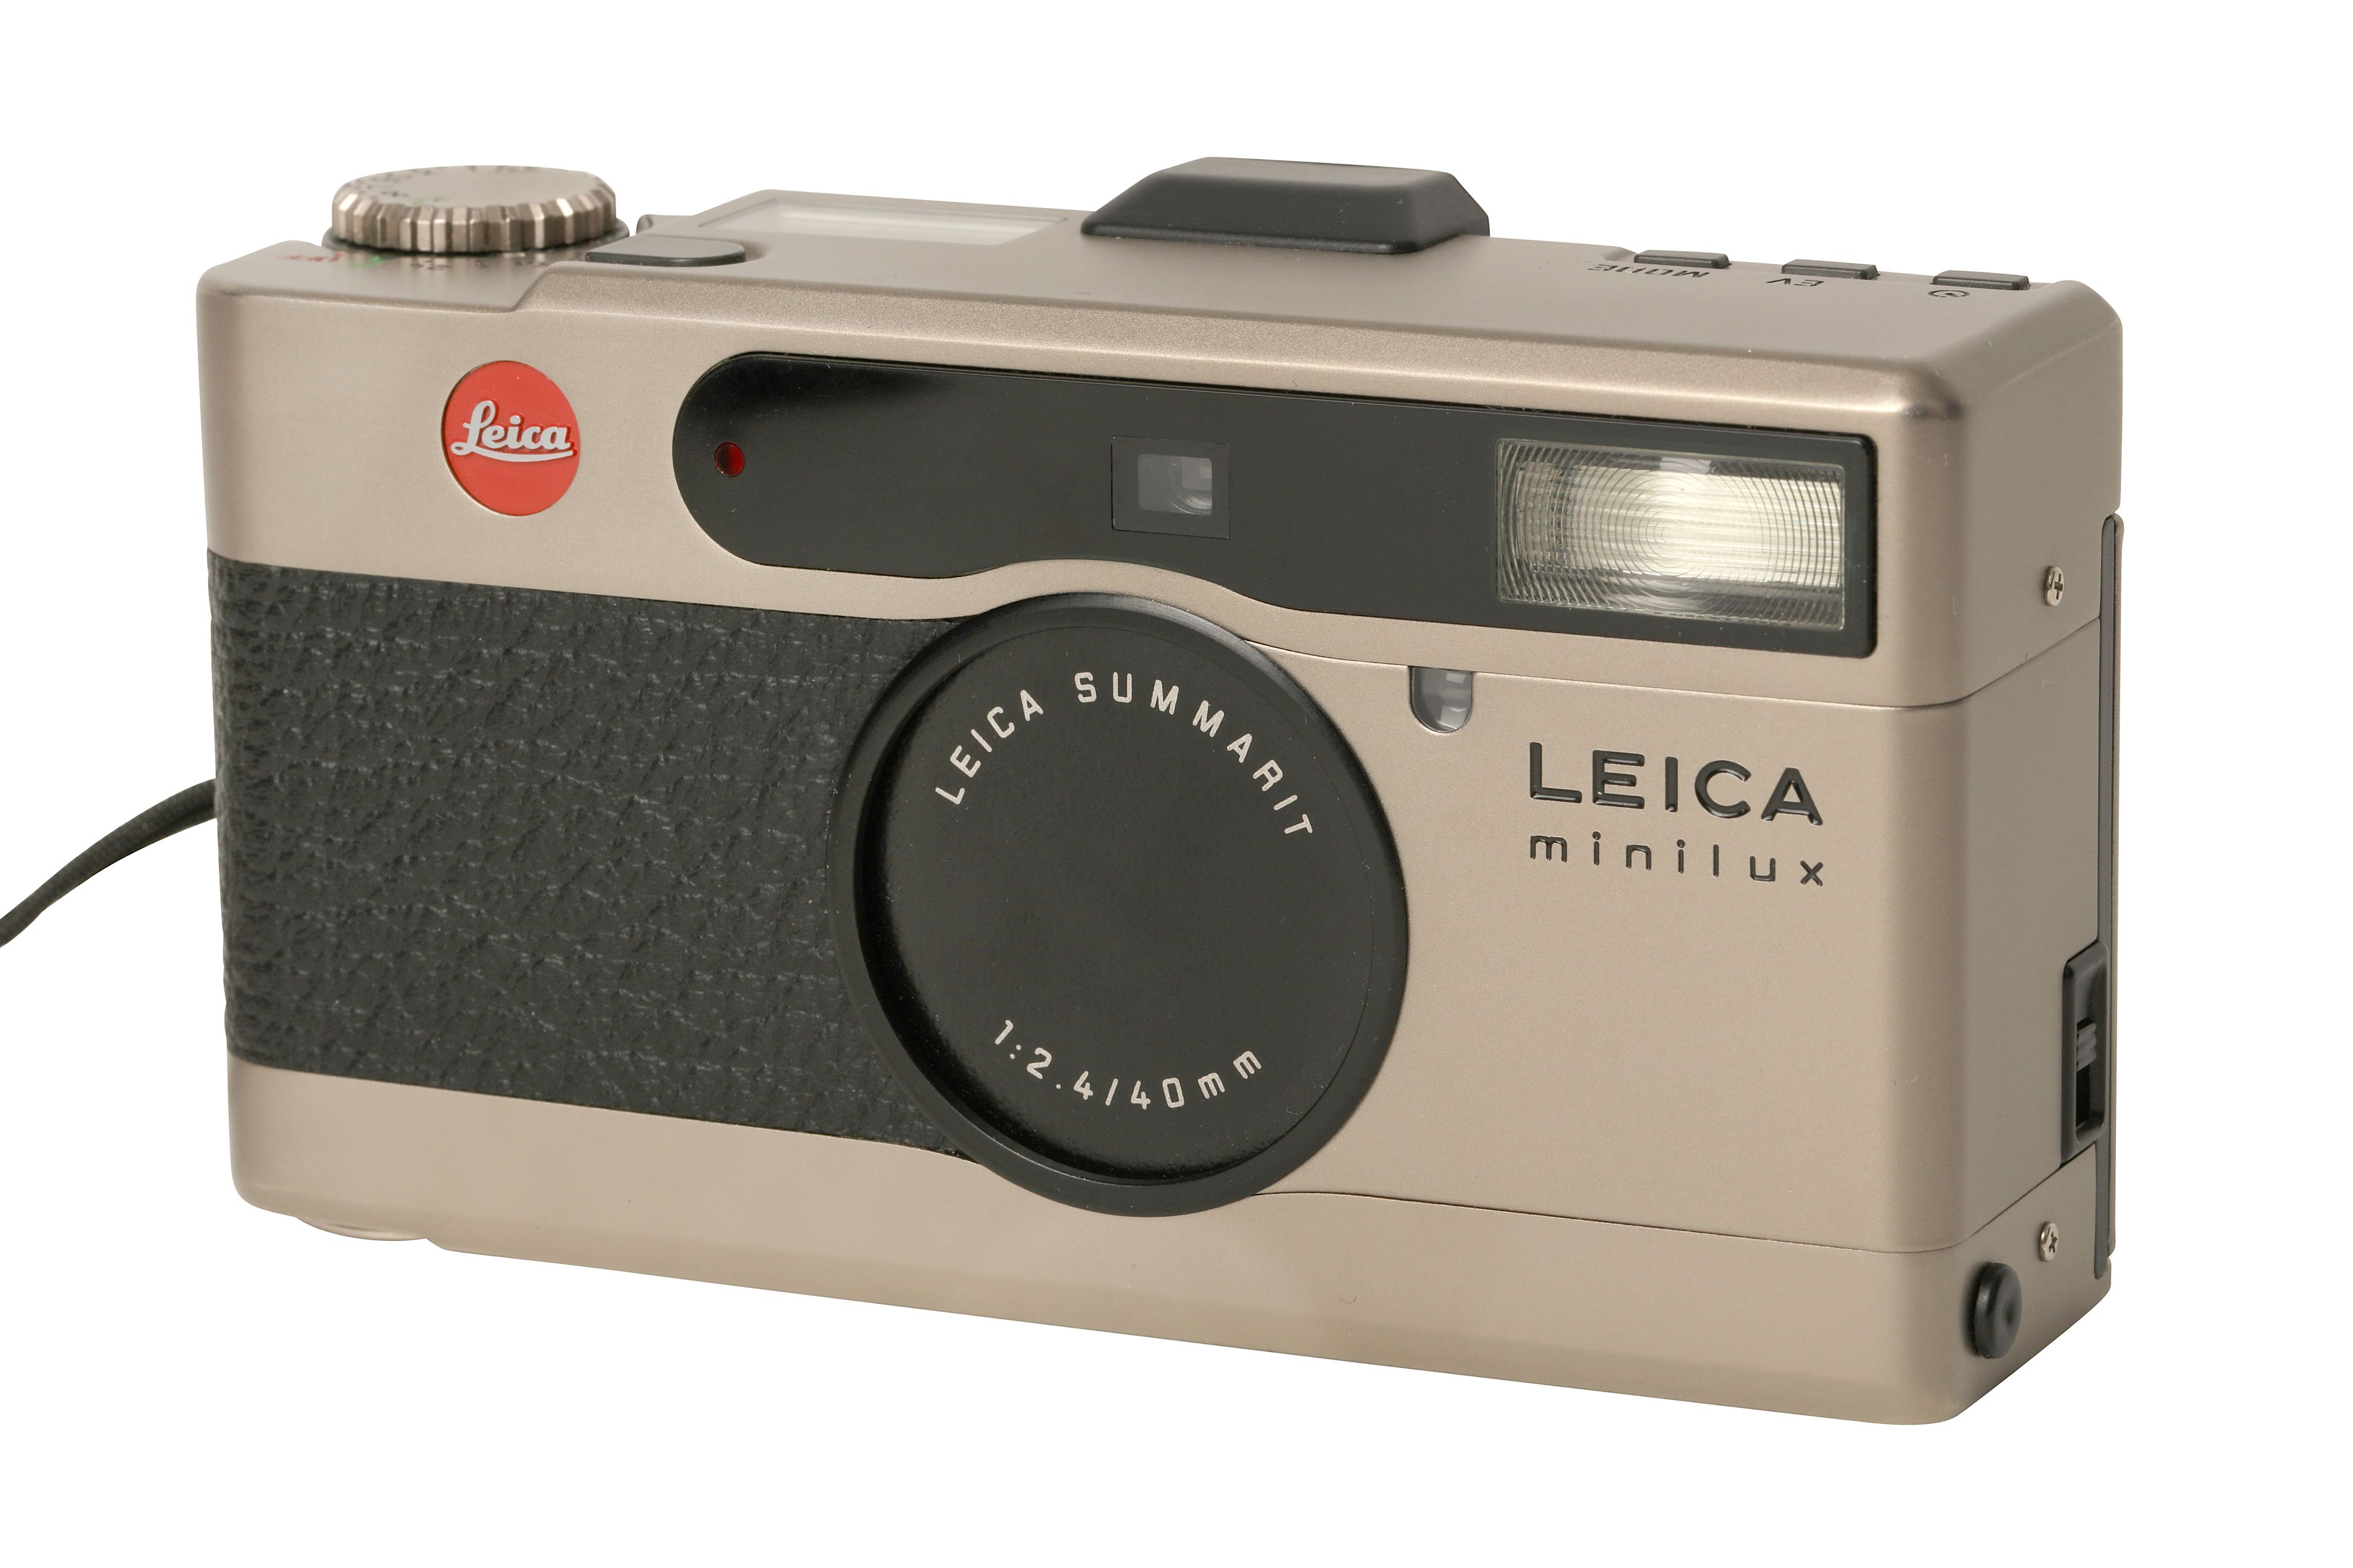 A Leica Minilux 35mm Compact Camera - Image 2 of 5